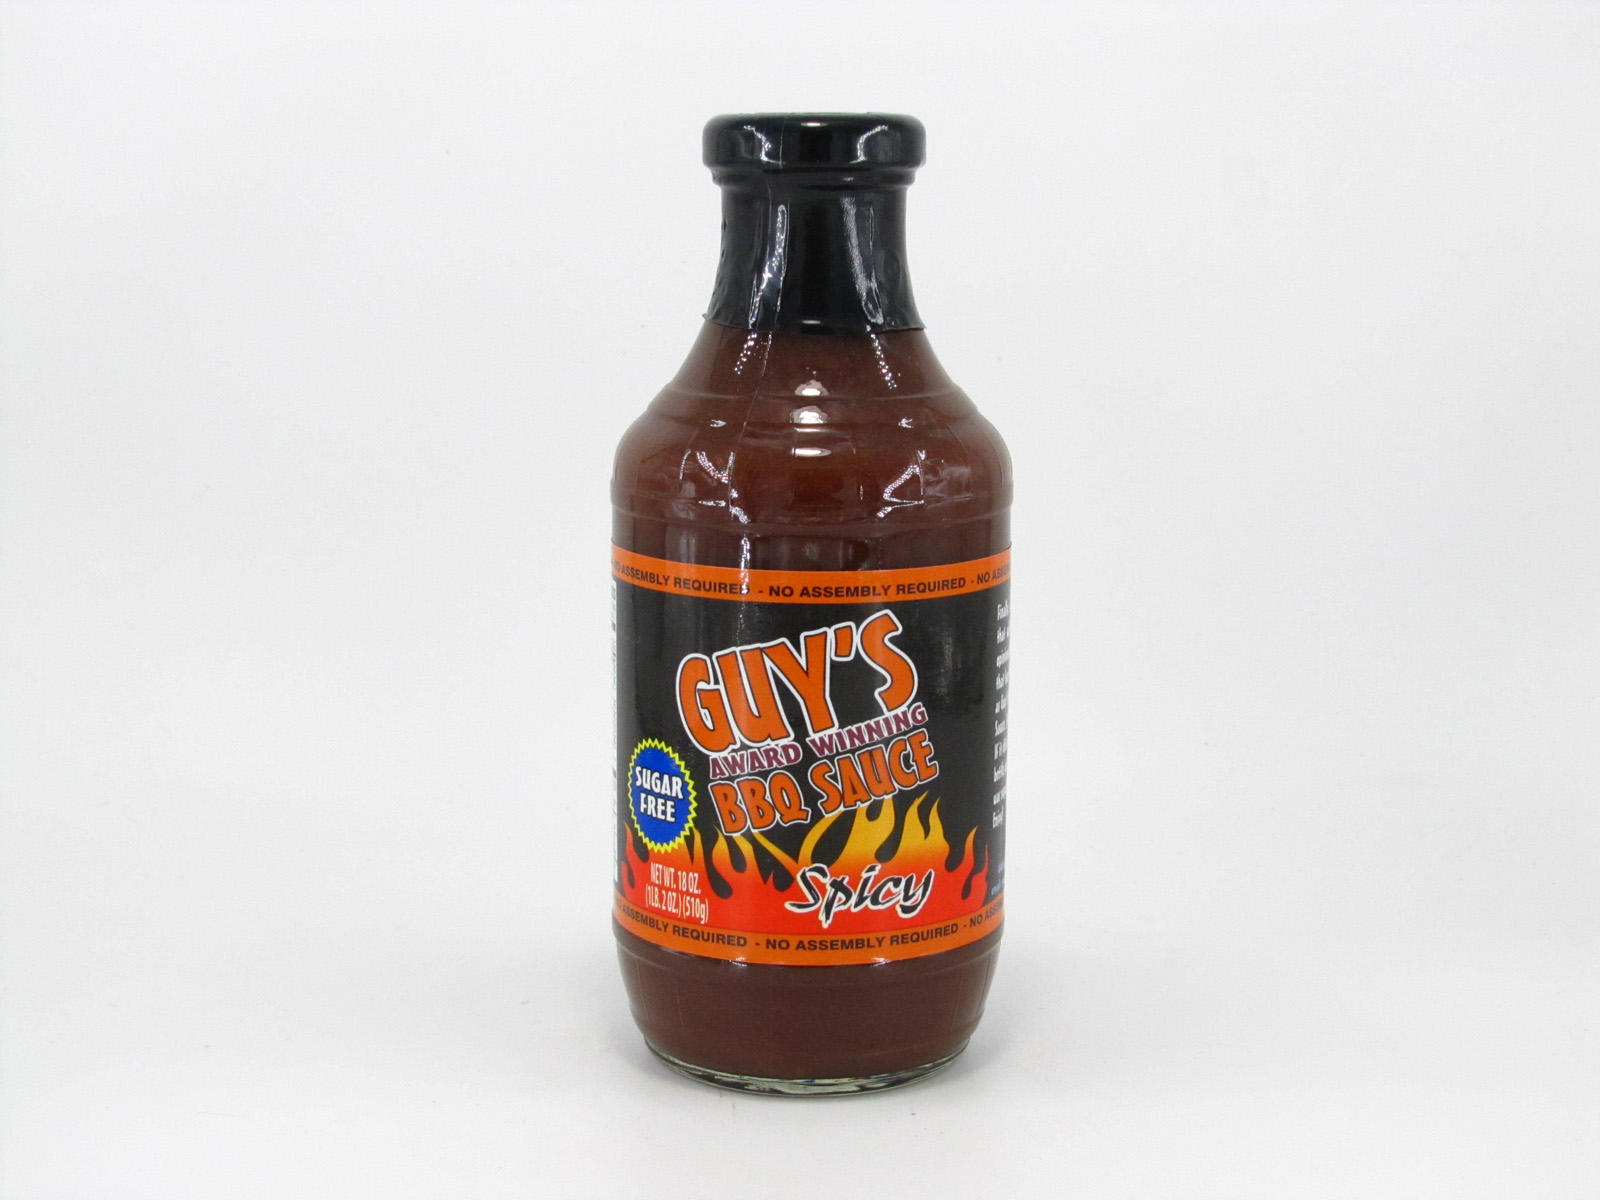 Guy's BBQ Sauce - Spicy - front view